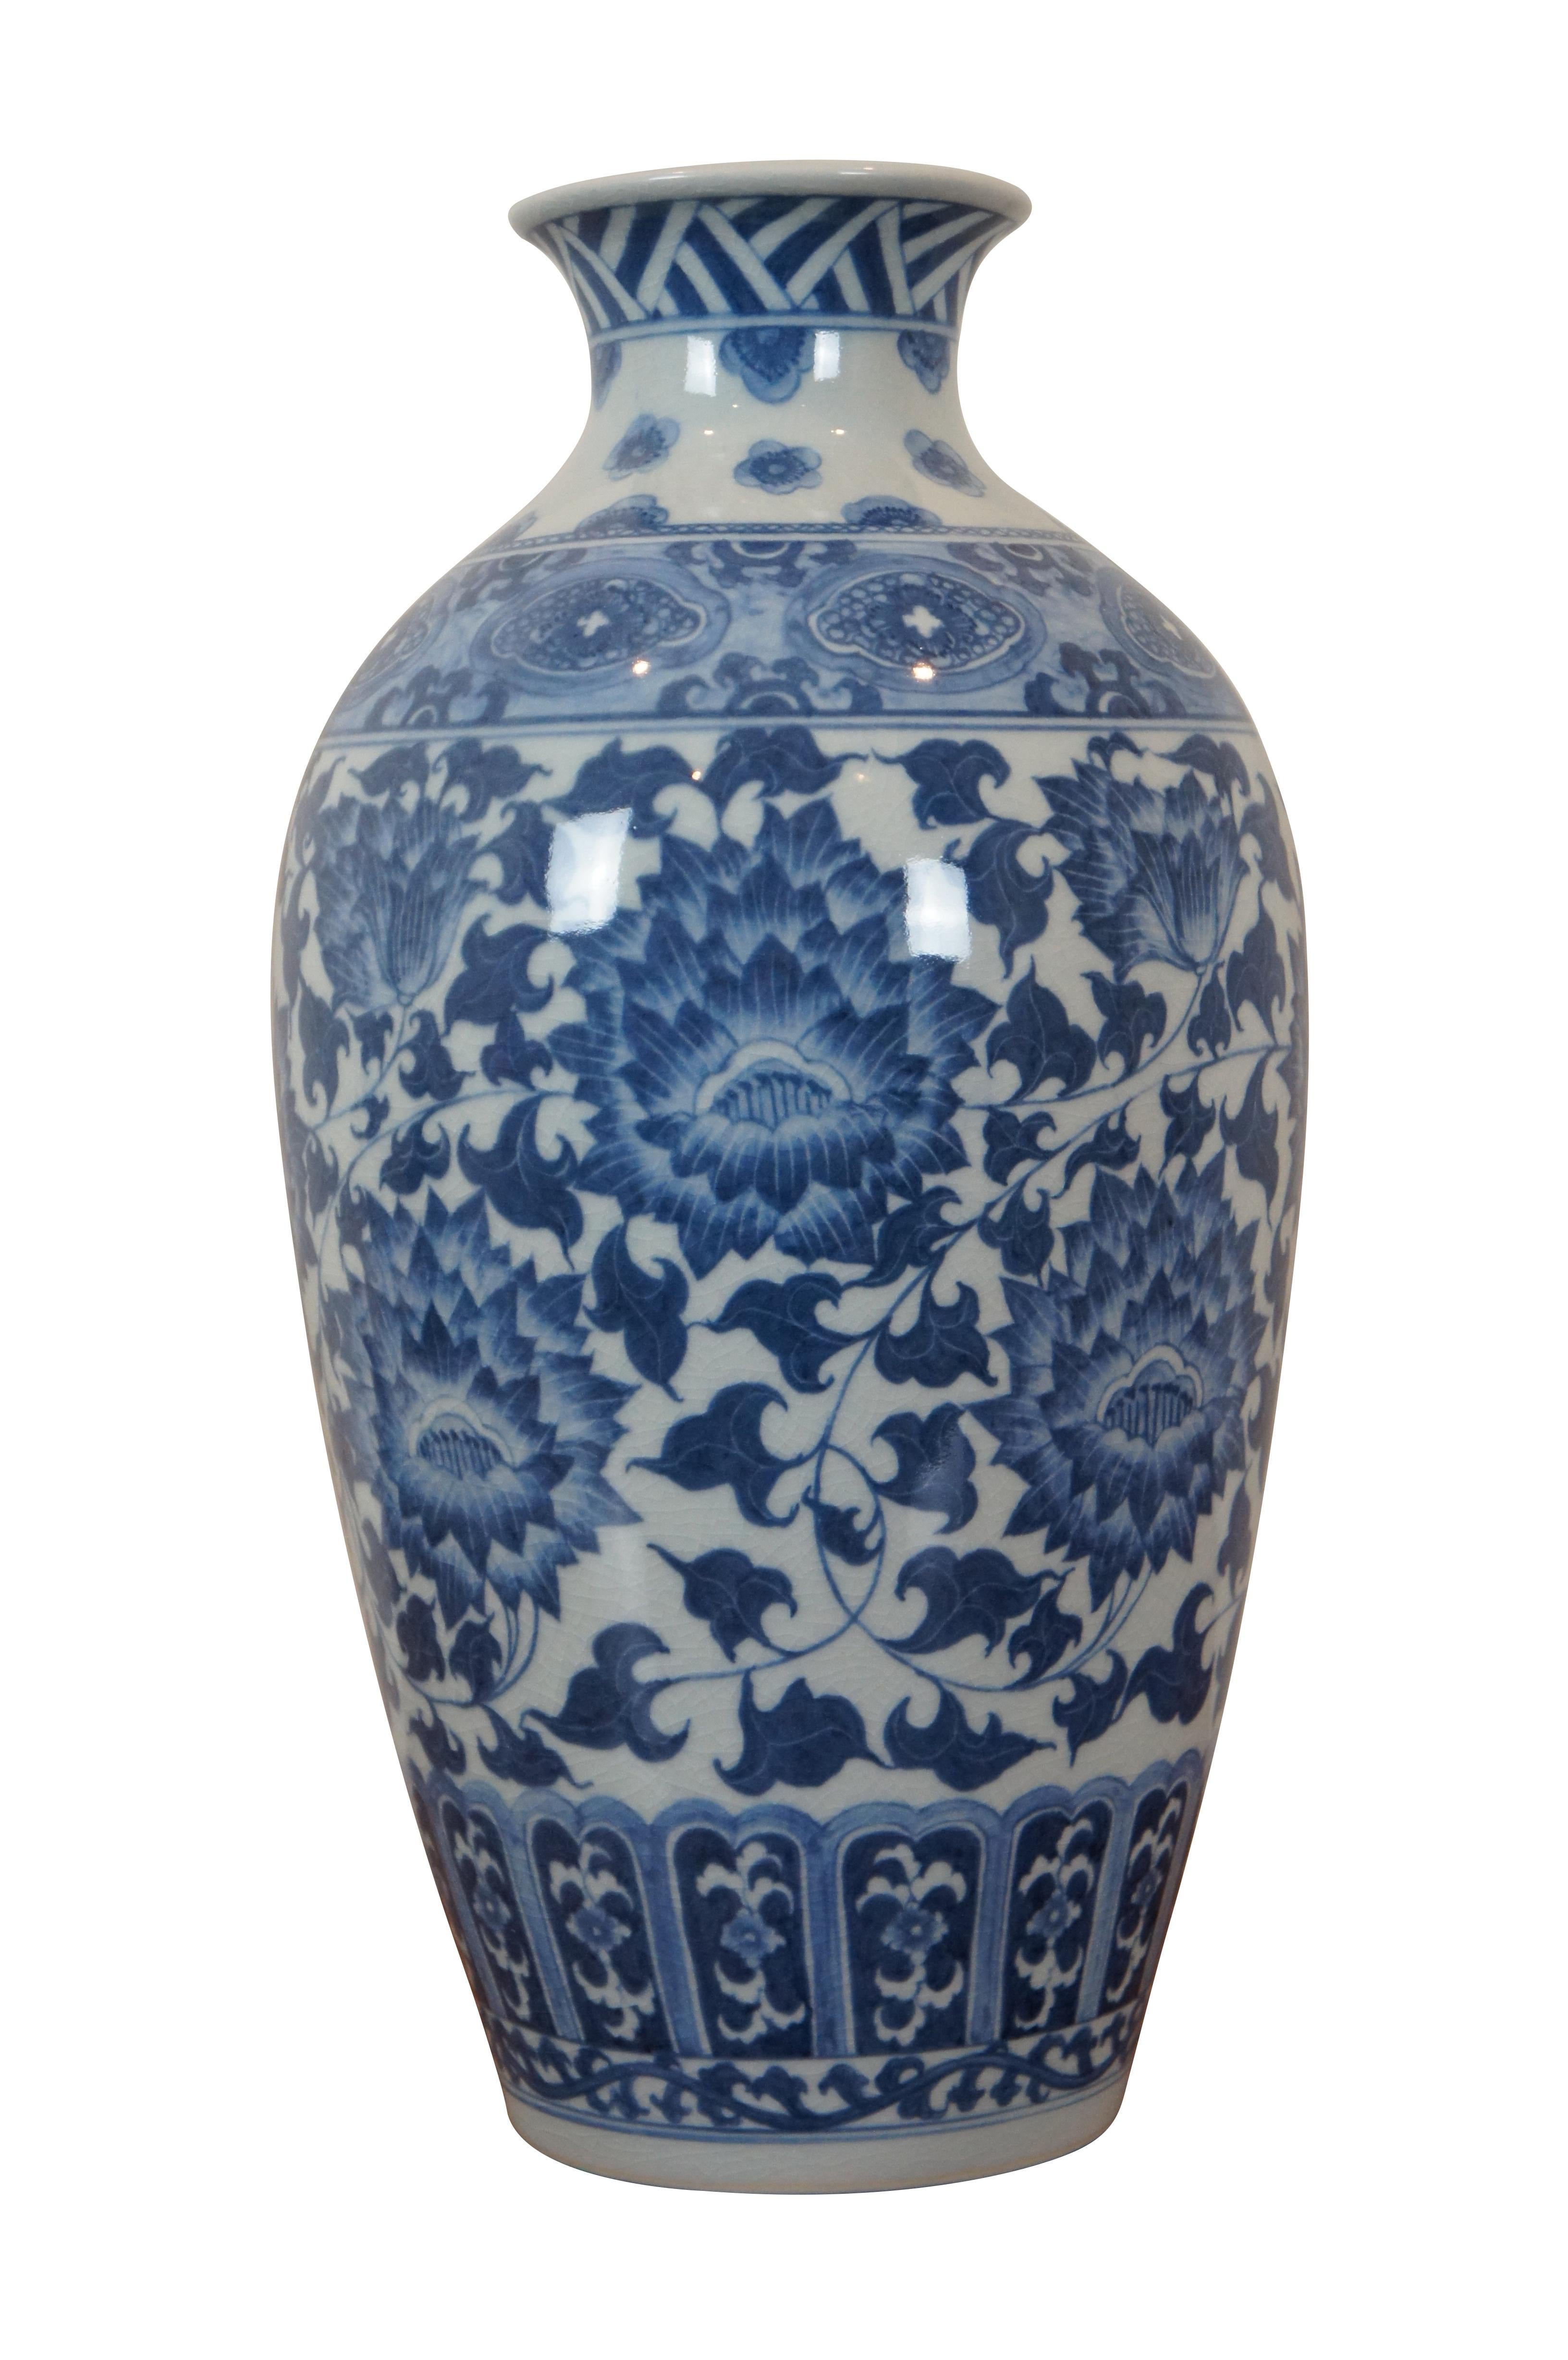 Vintage Maitland Smith chinoiserie / Chinese style vase featuring a floral pattern in blue and white with artistic crazing to the finish. Hand Made in Thailand. #2187-457.

Dimensions:
8” x 14.75” (Diameter x Height)